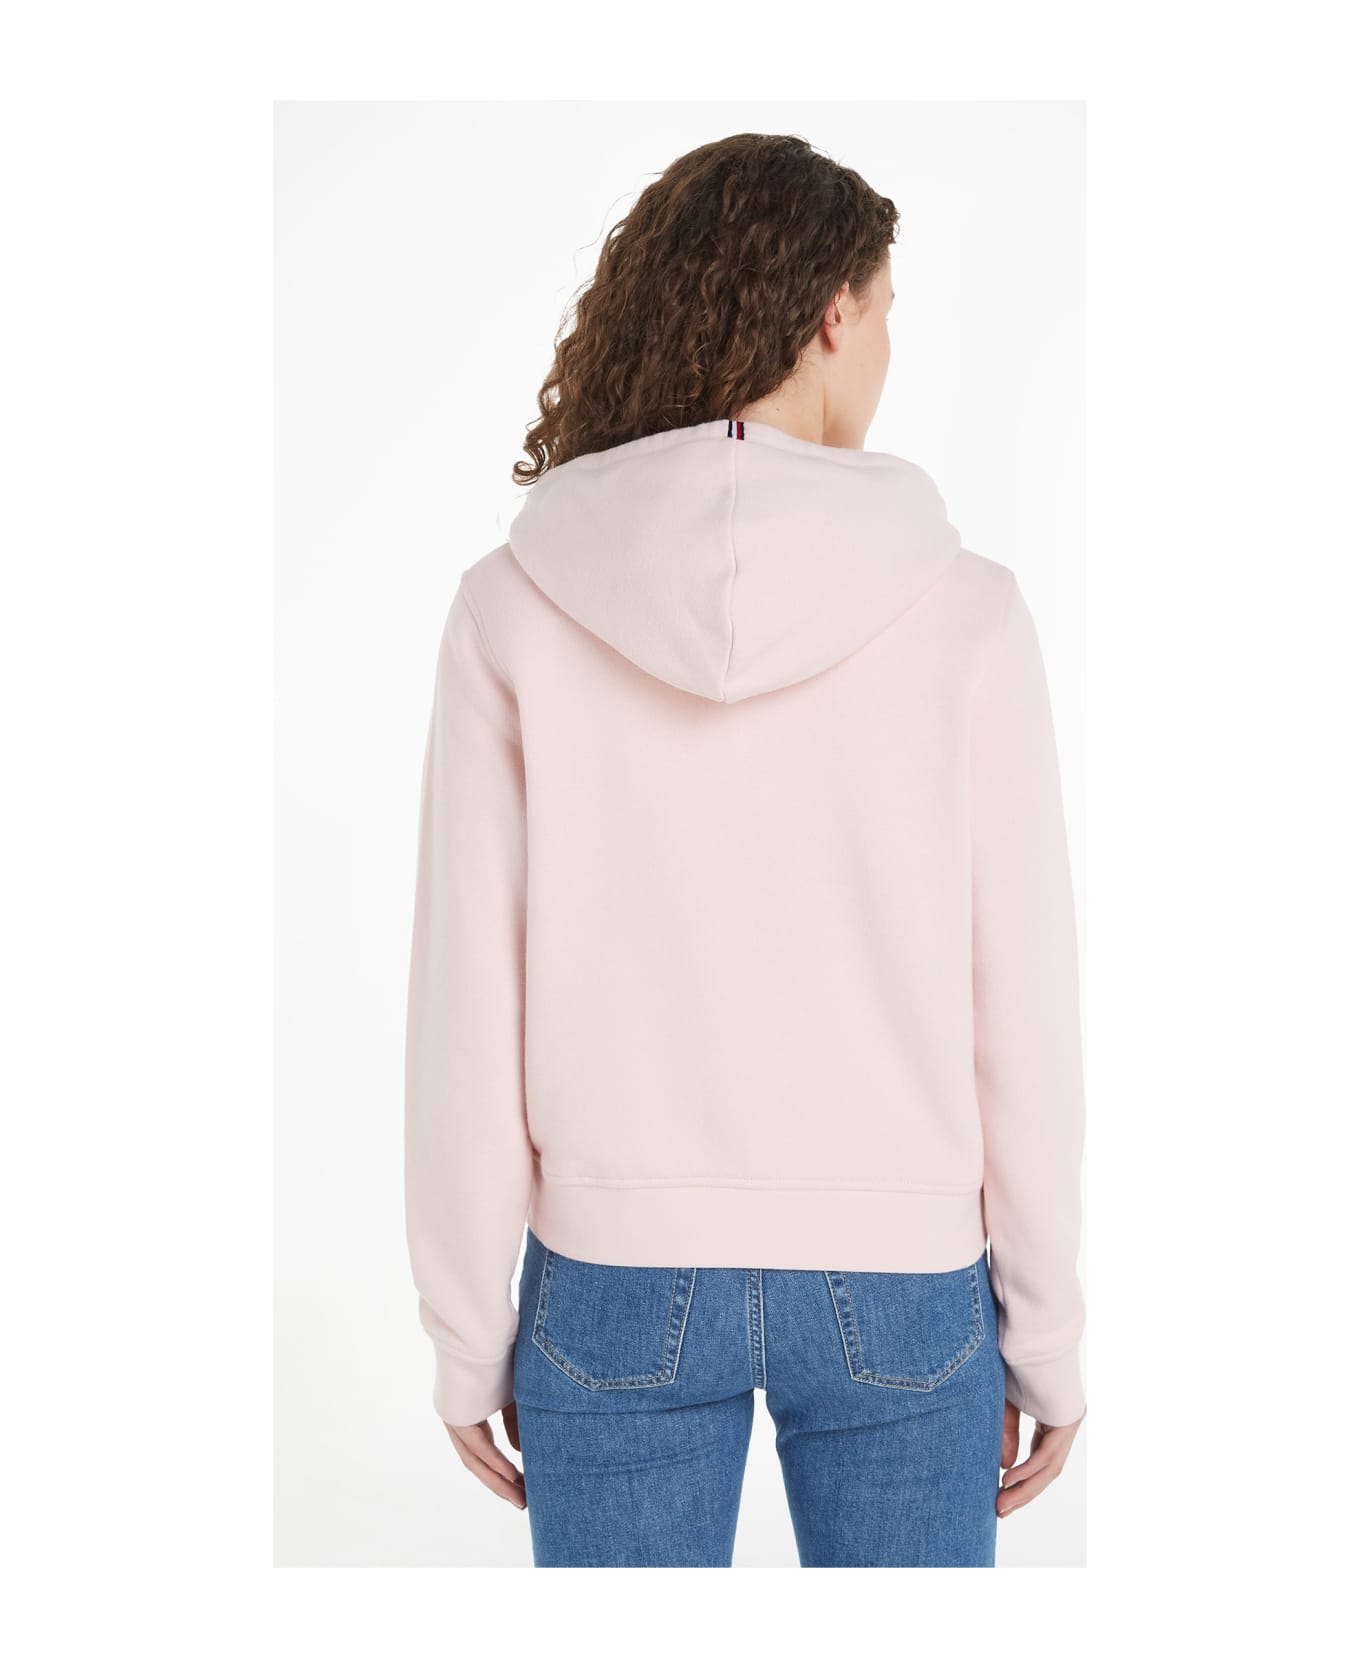 Tommy Hilfiger Pink Sweatshirt With Zip And Hood - WHIMSY PINK ジャケット